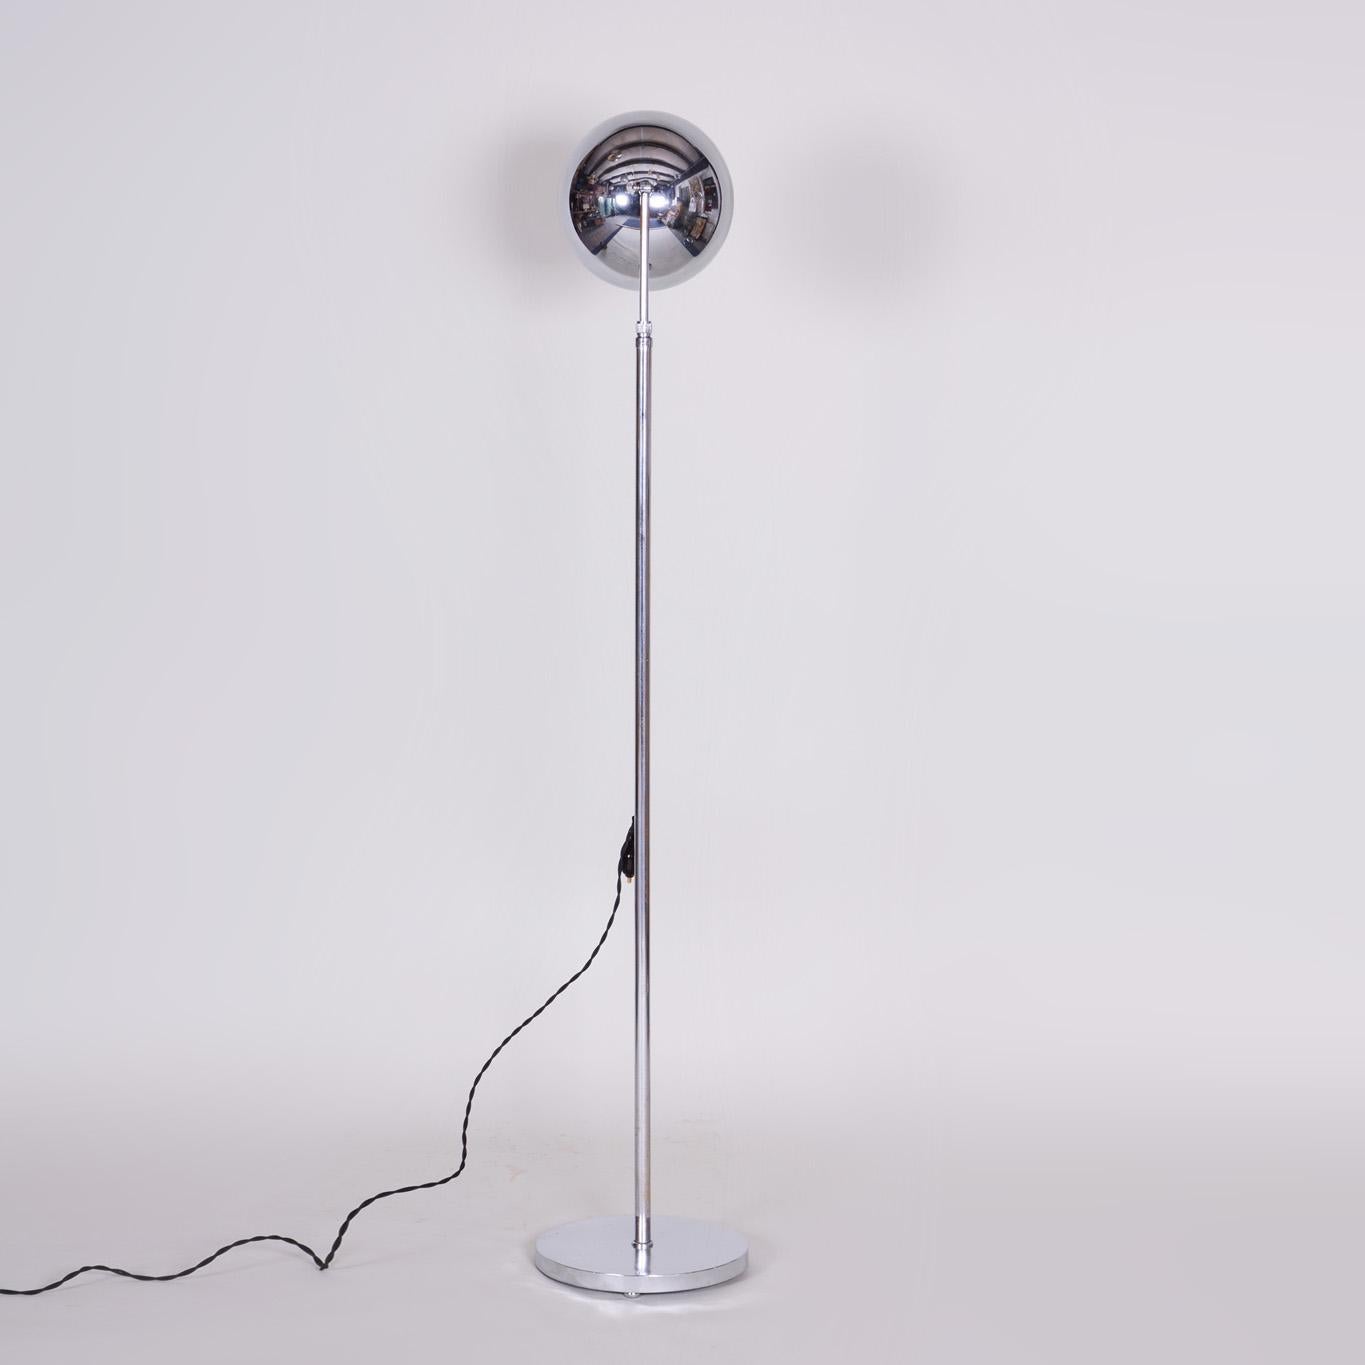 Czech Restored Bauhaus Floor Lamp Made in the 1930s, Made Out of Chrome Plated Steel For Sale